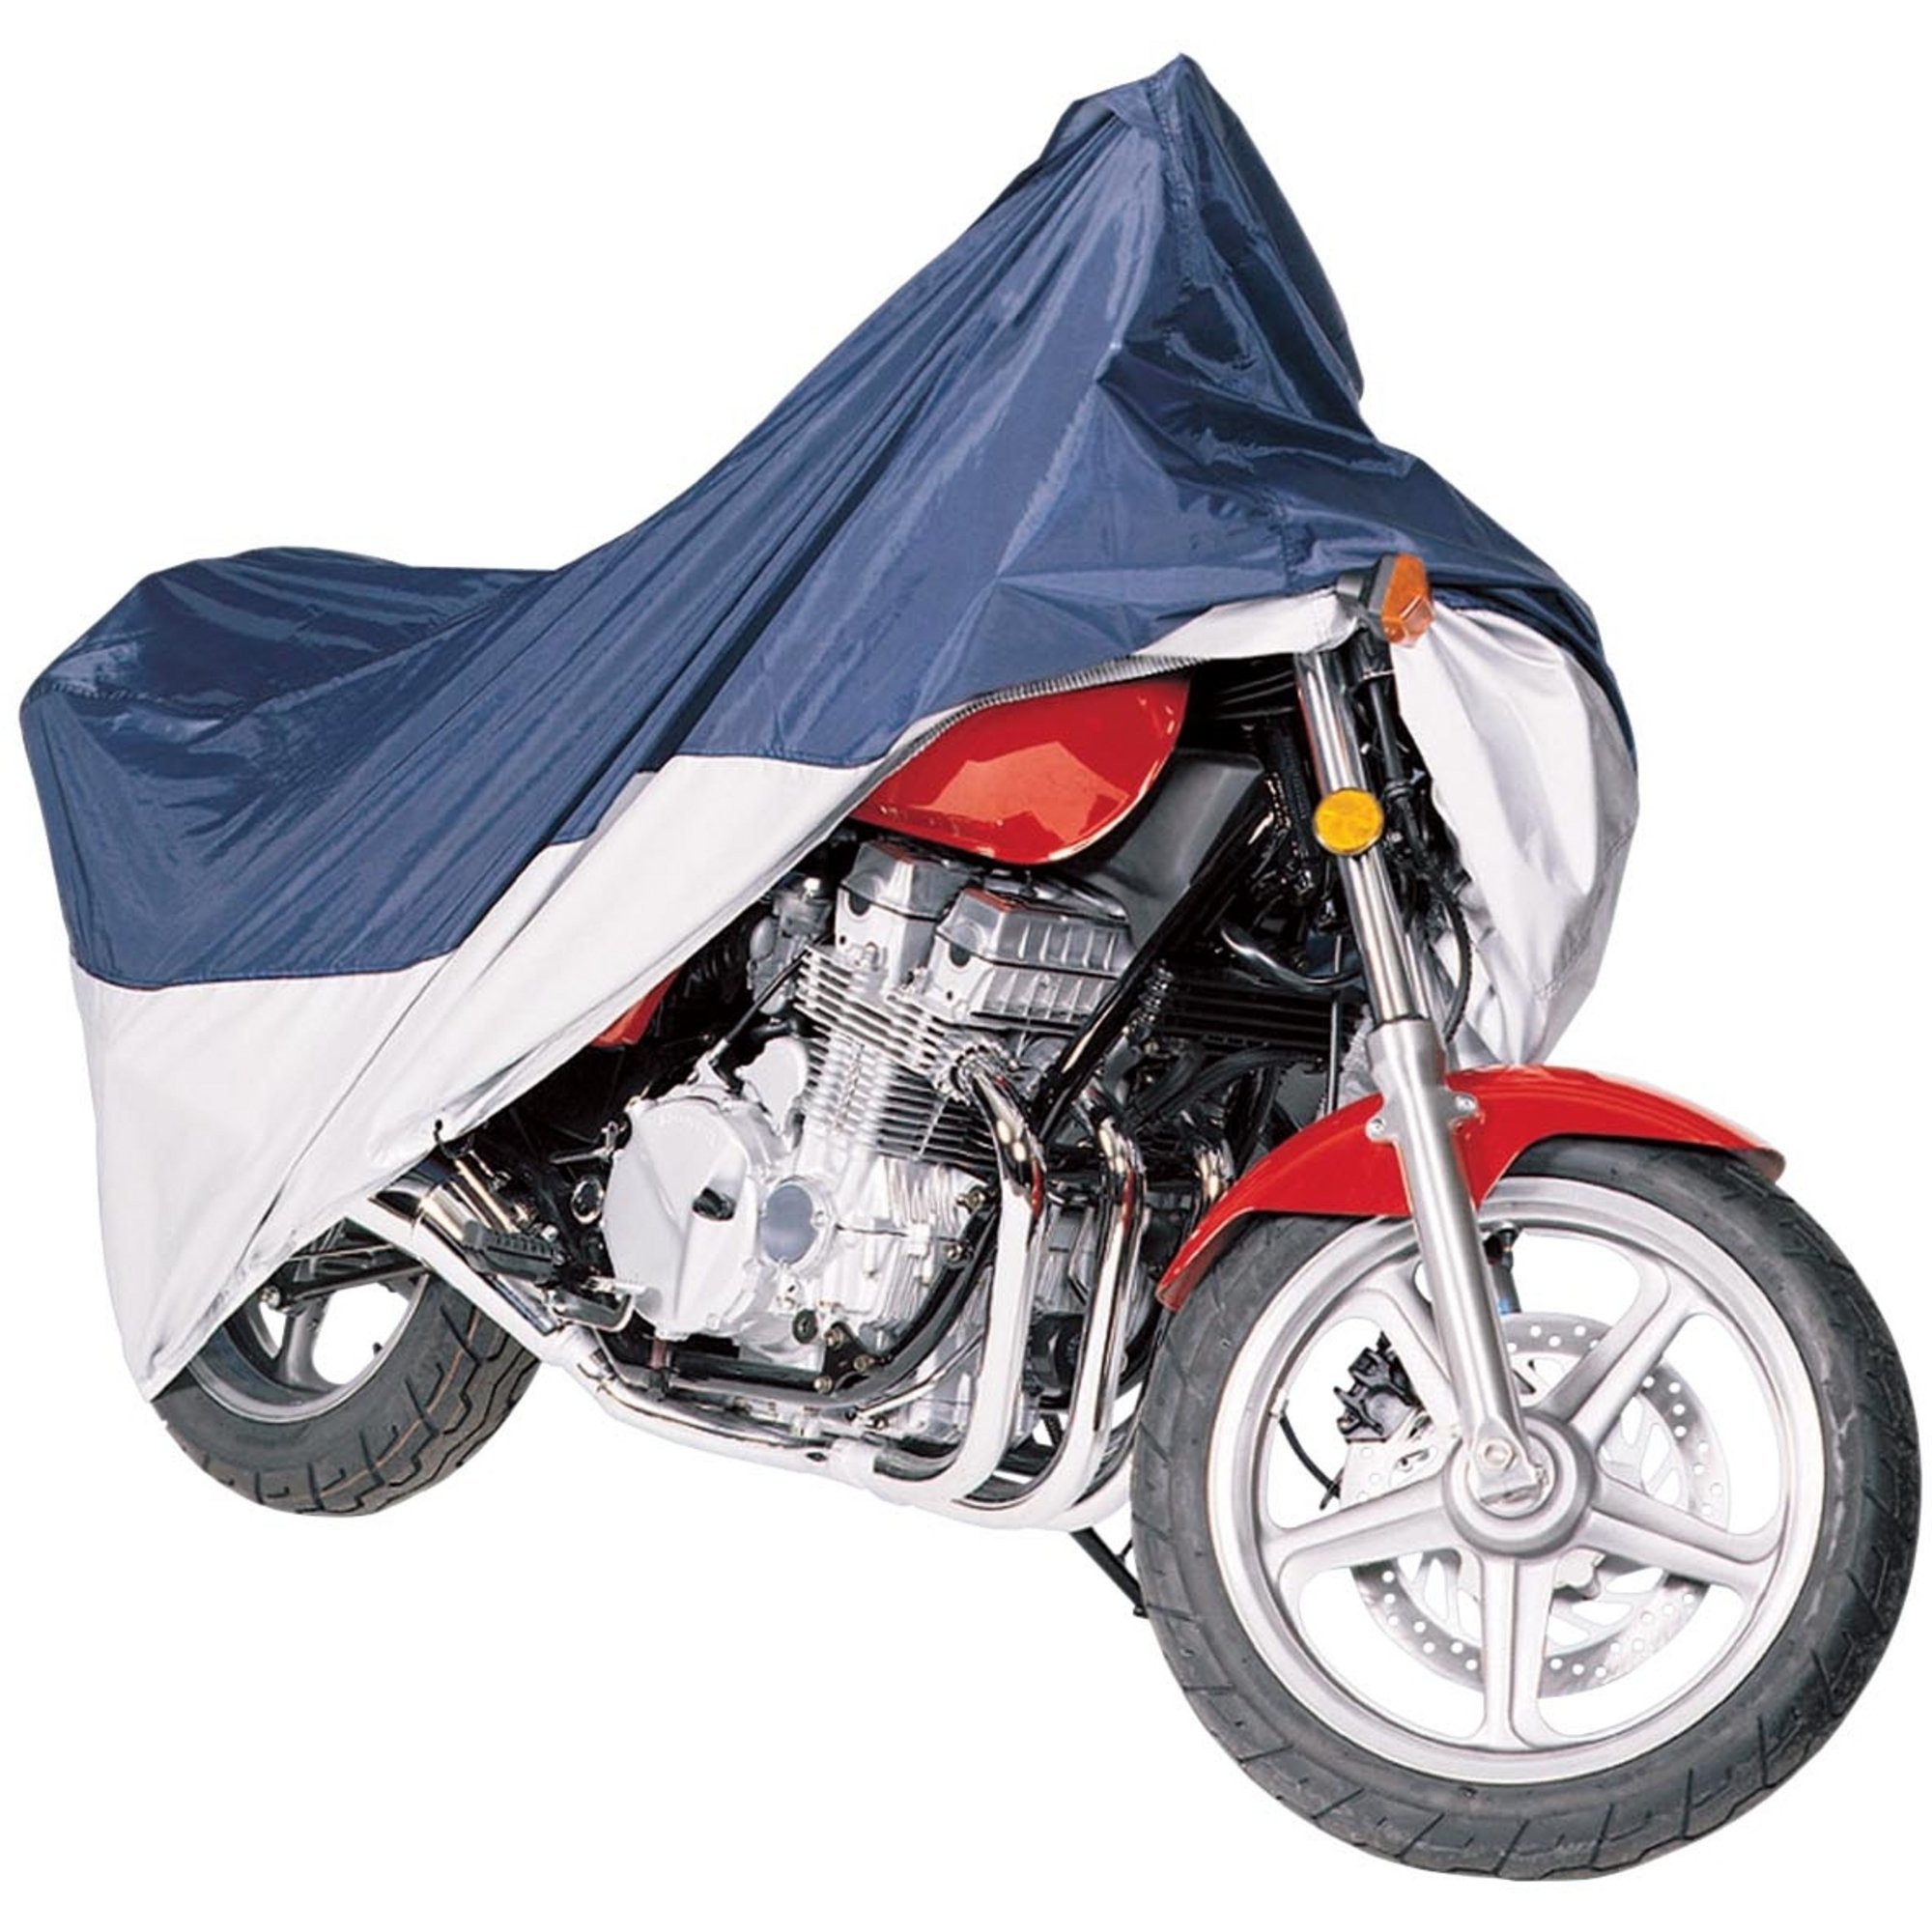 MotoGear Motorcycle Cover – XL, Blue and Silver, Fits Motorcycles up to 1,500cc, Model - Classic Accessories 65-006-043501-00